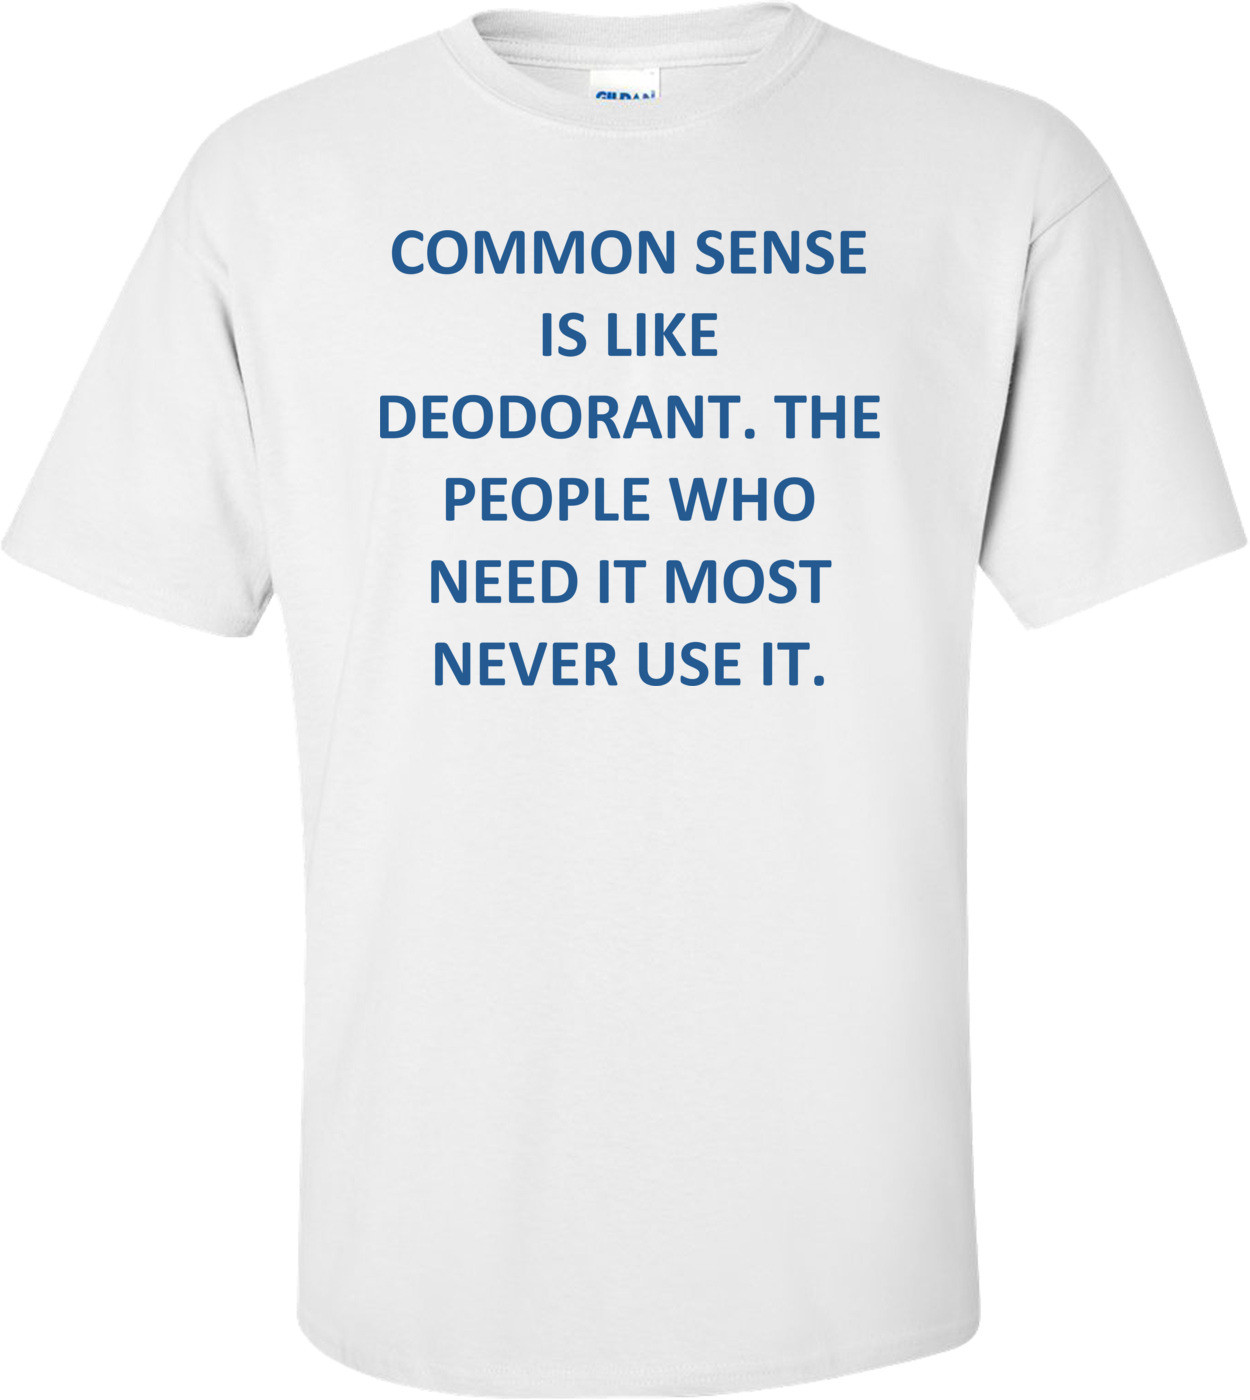 COMMON SENSE IS LIKE DEODORANT. THE PEOPLE WHO NEED IT MOST NEVER USE IT. Shirt